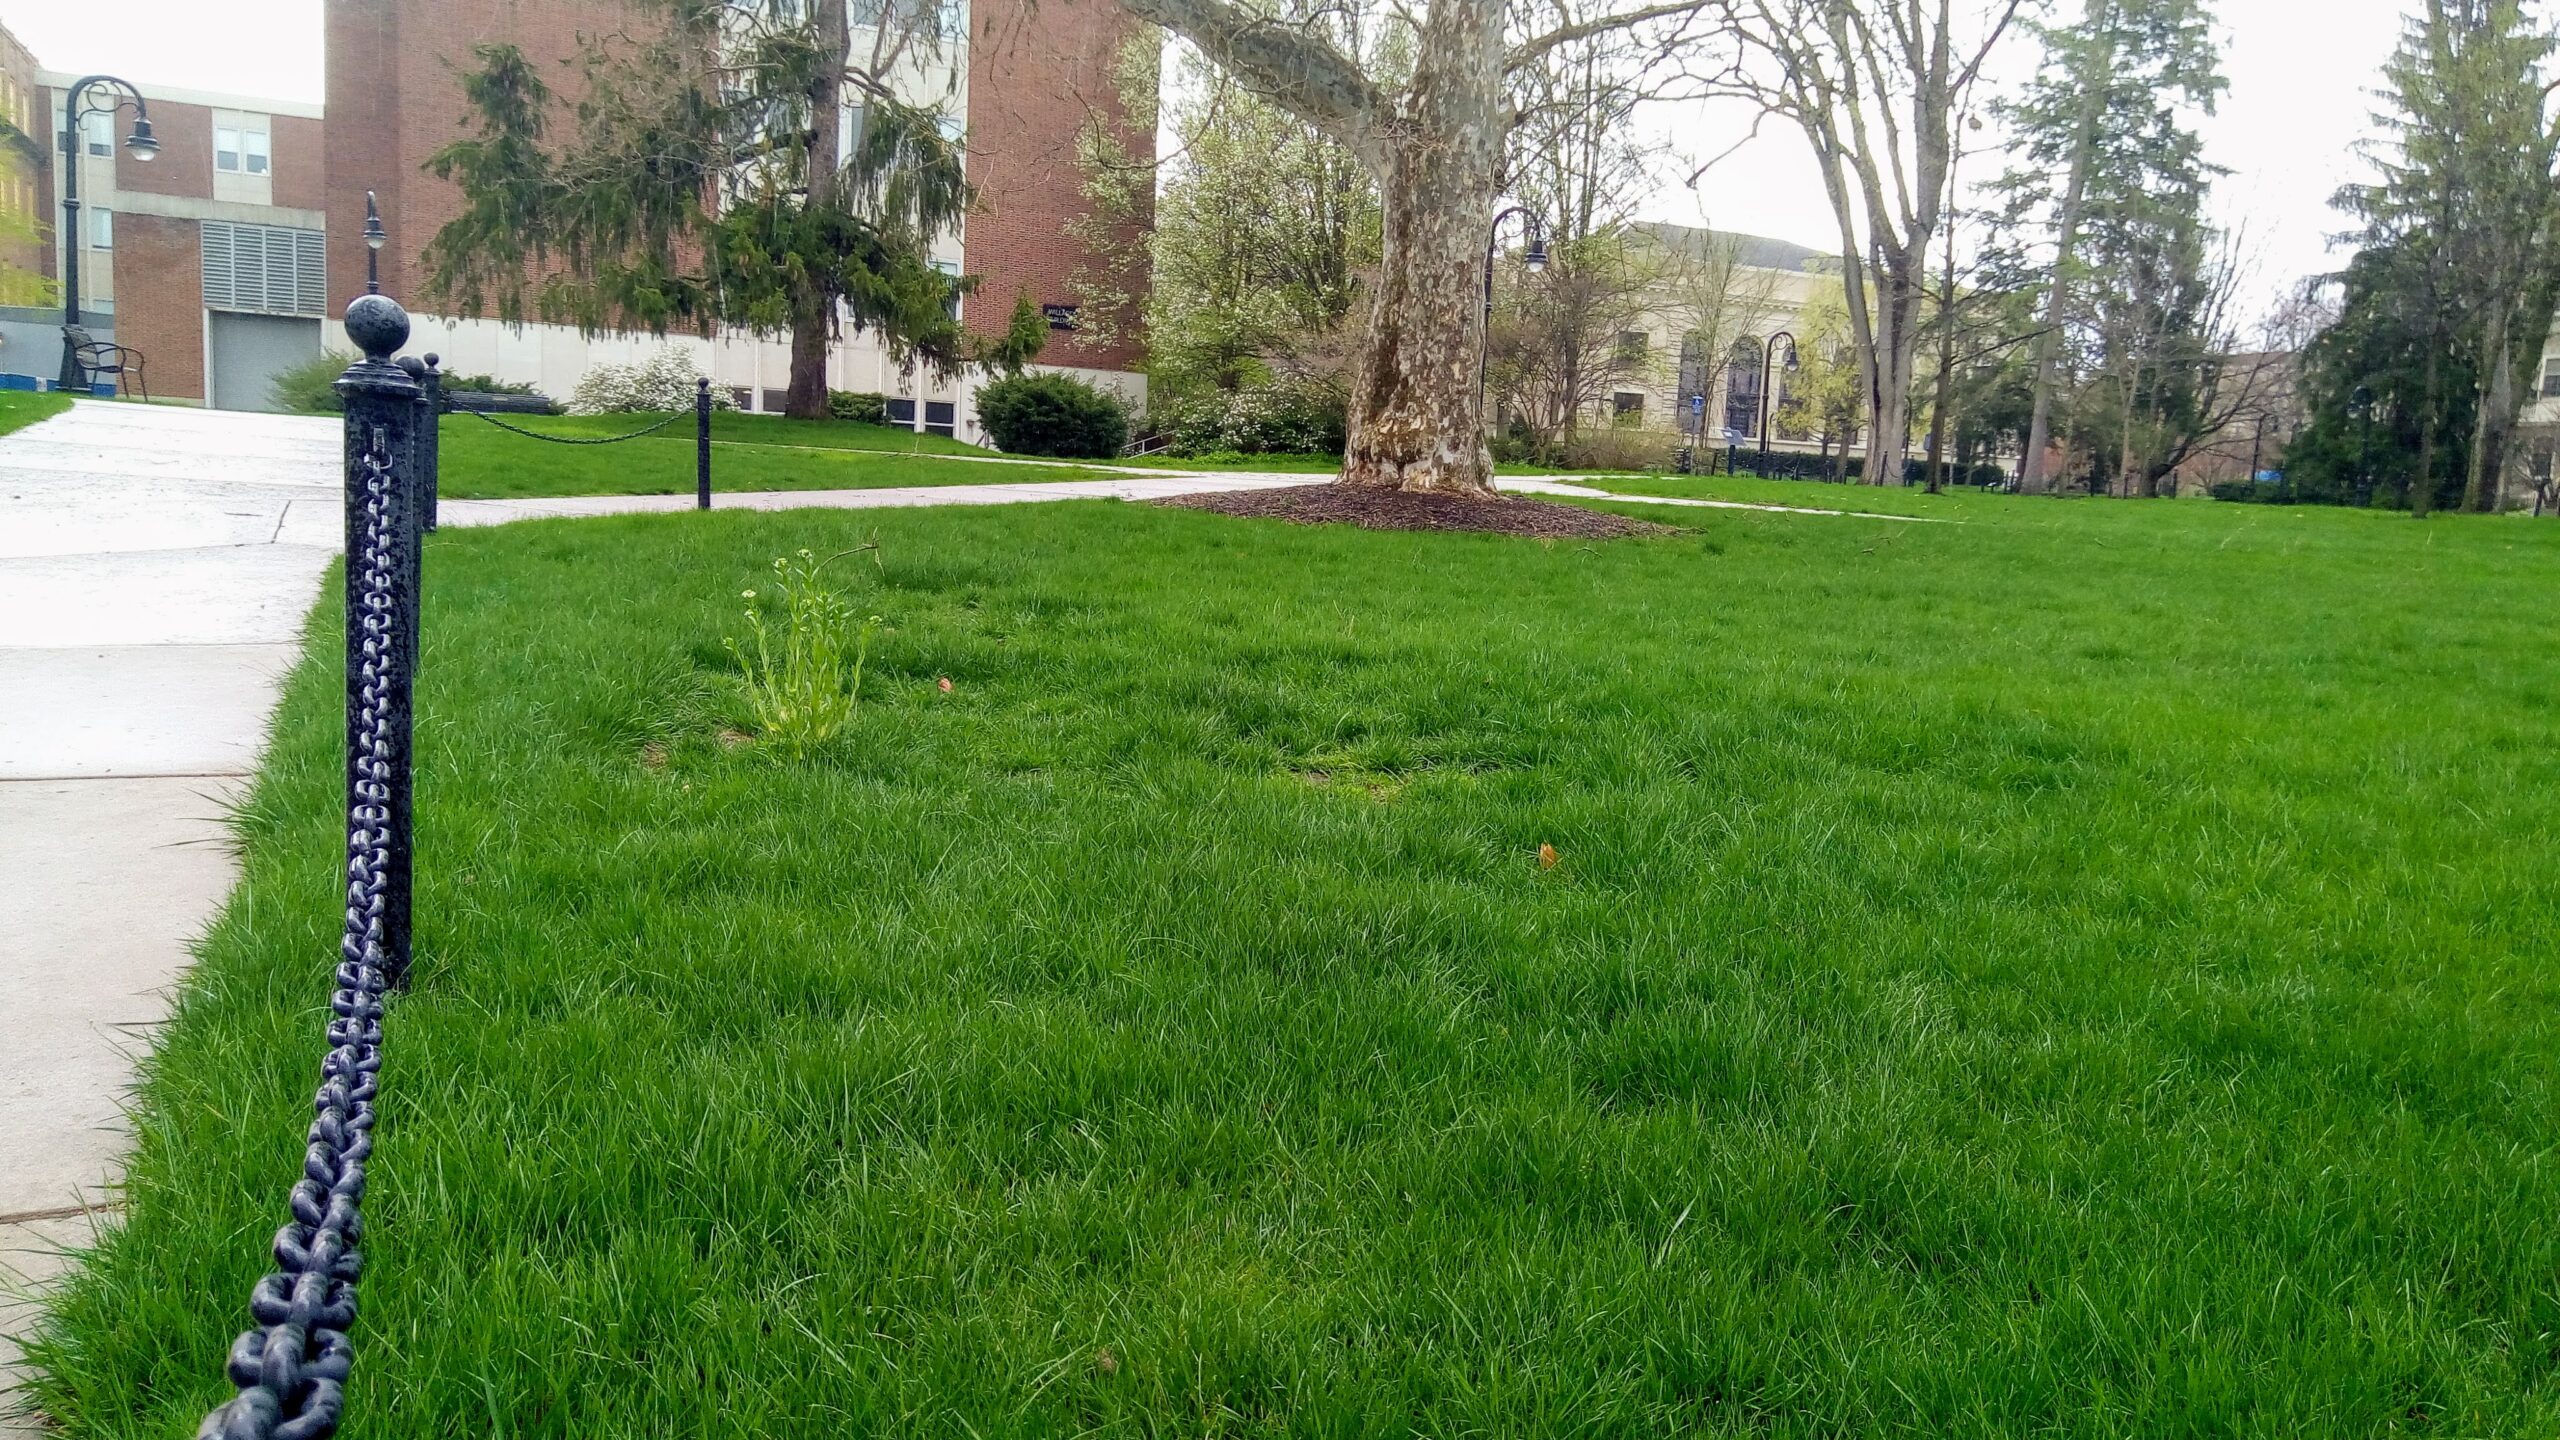 A large weed growing on the PSU campus lawn